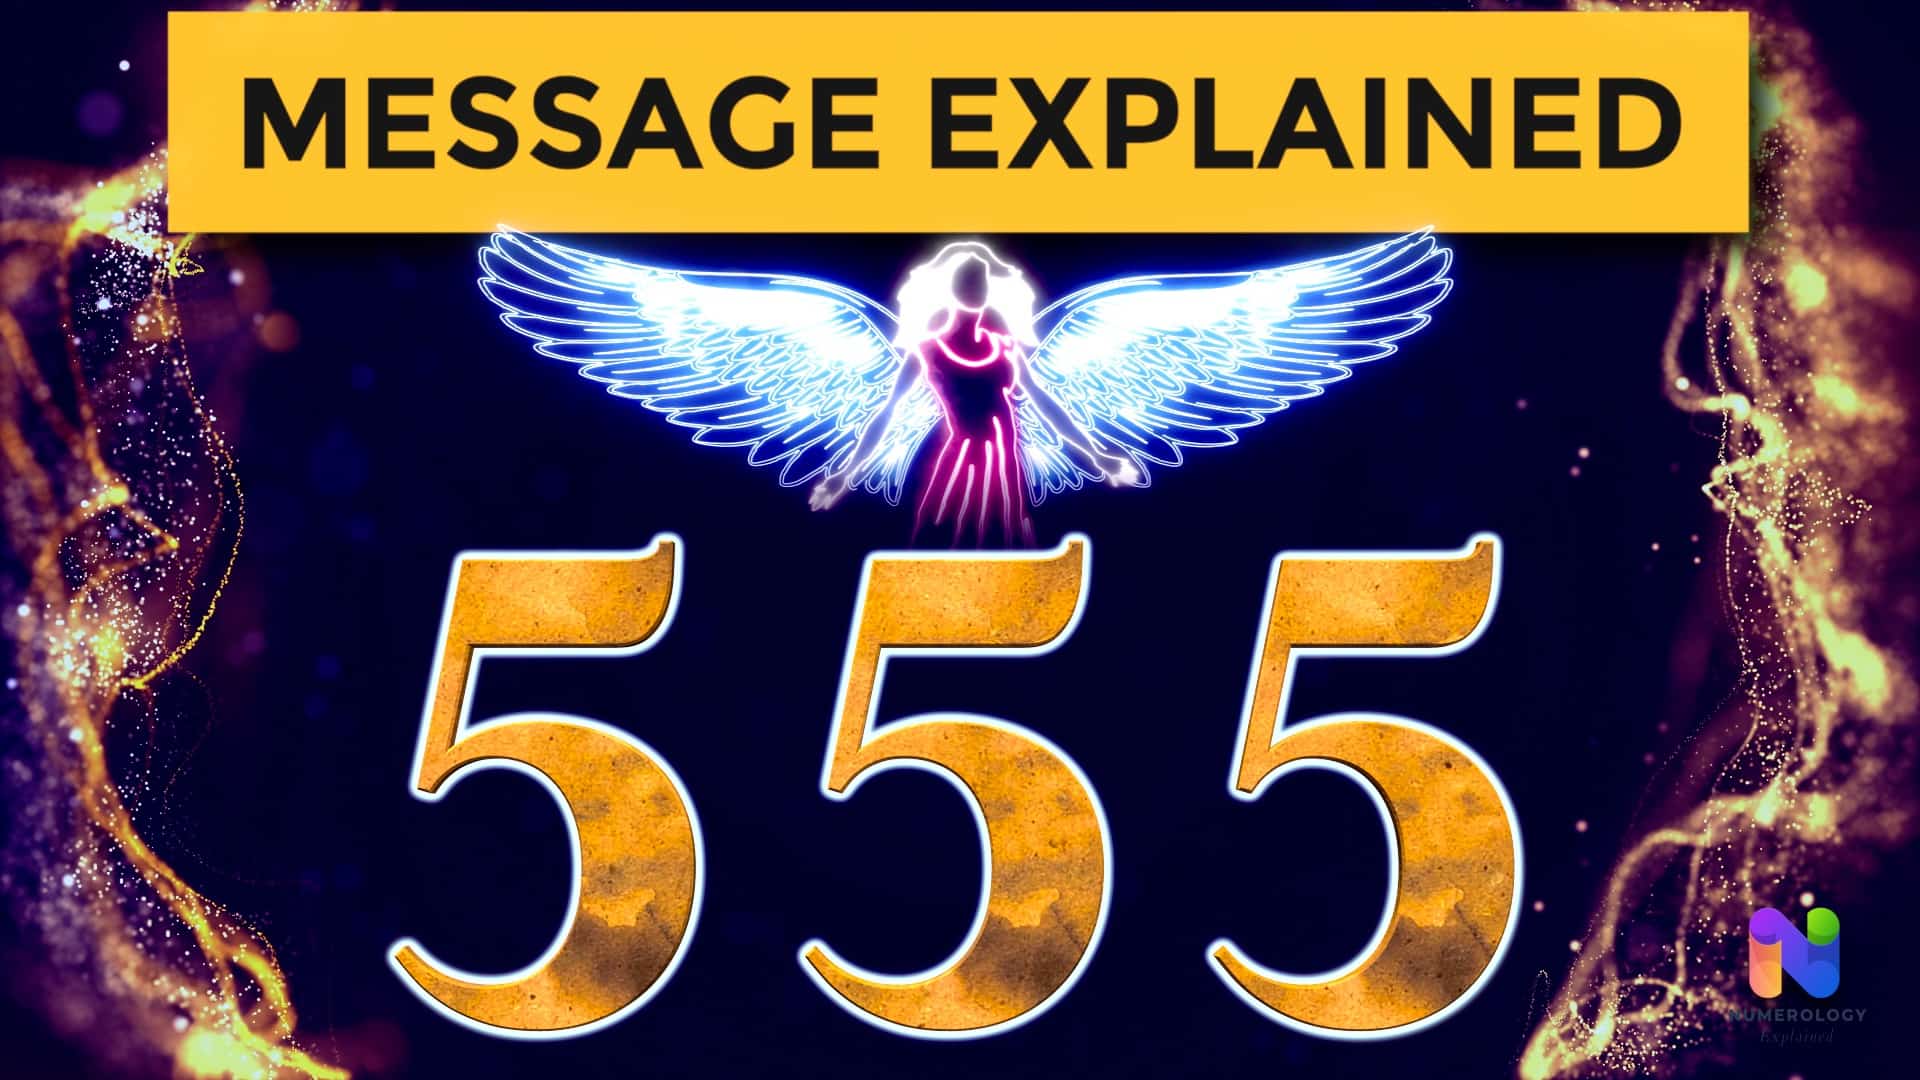 What Does 555 Angel Number Mean?